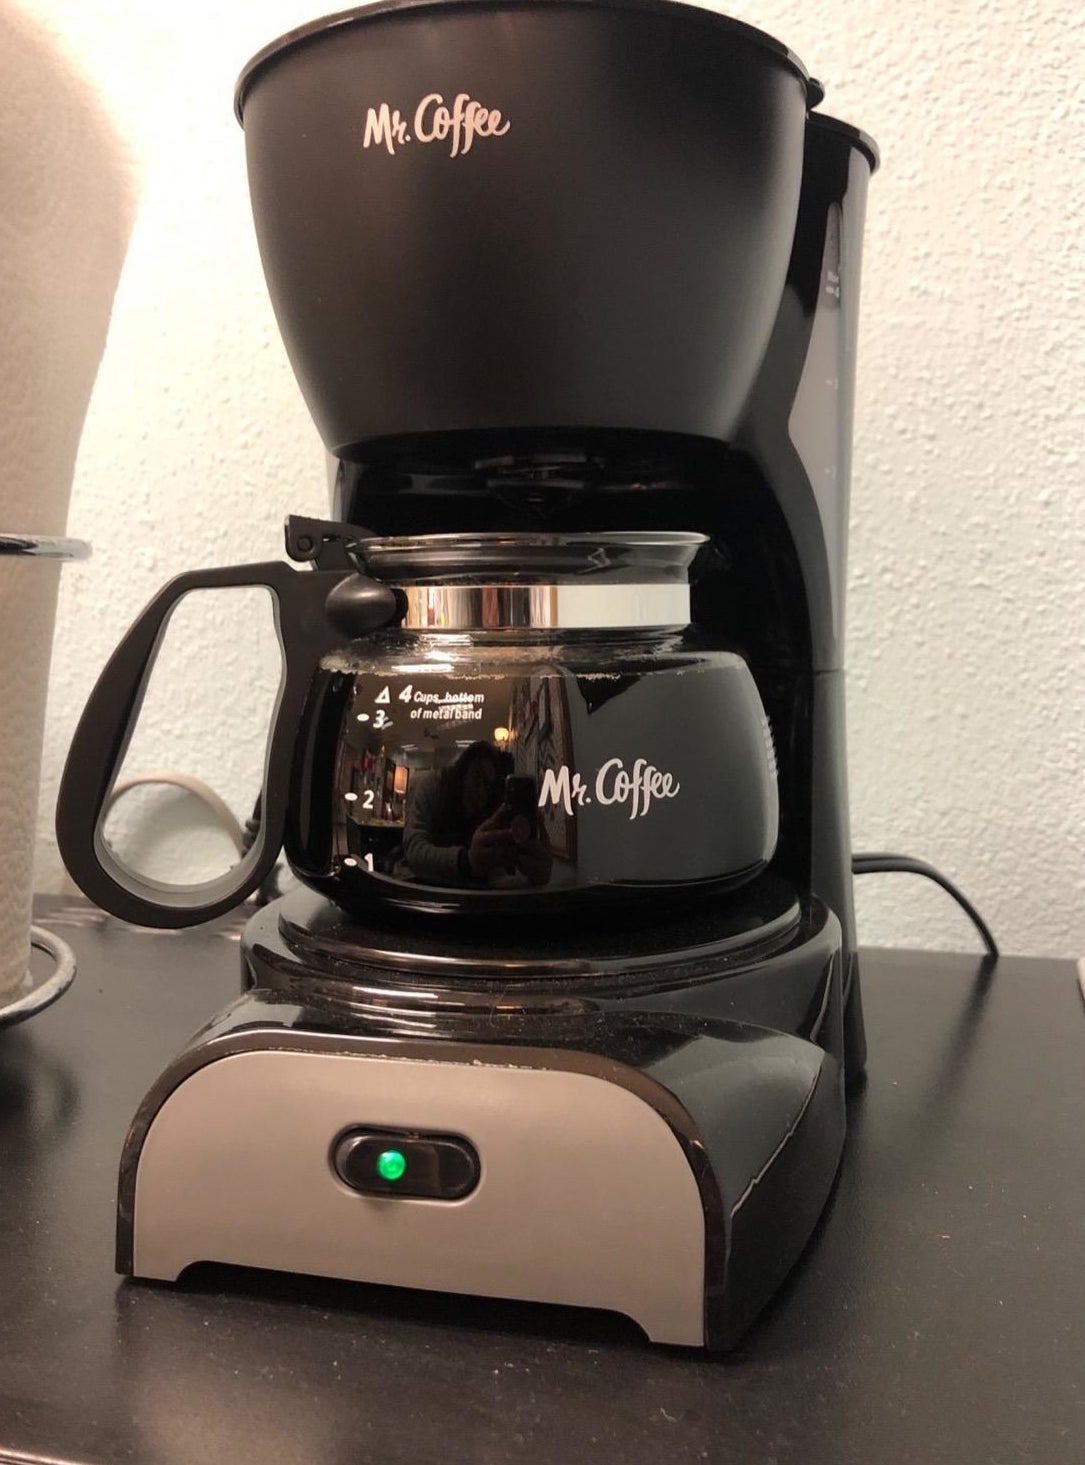 Best Cheap Coffee Maker: Inexpensive Models for Your Budget